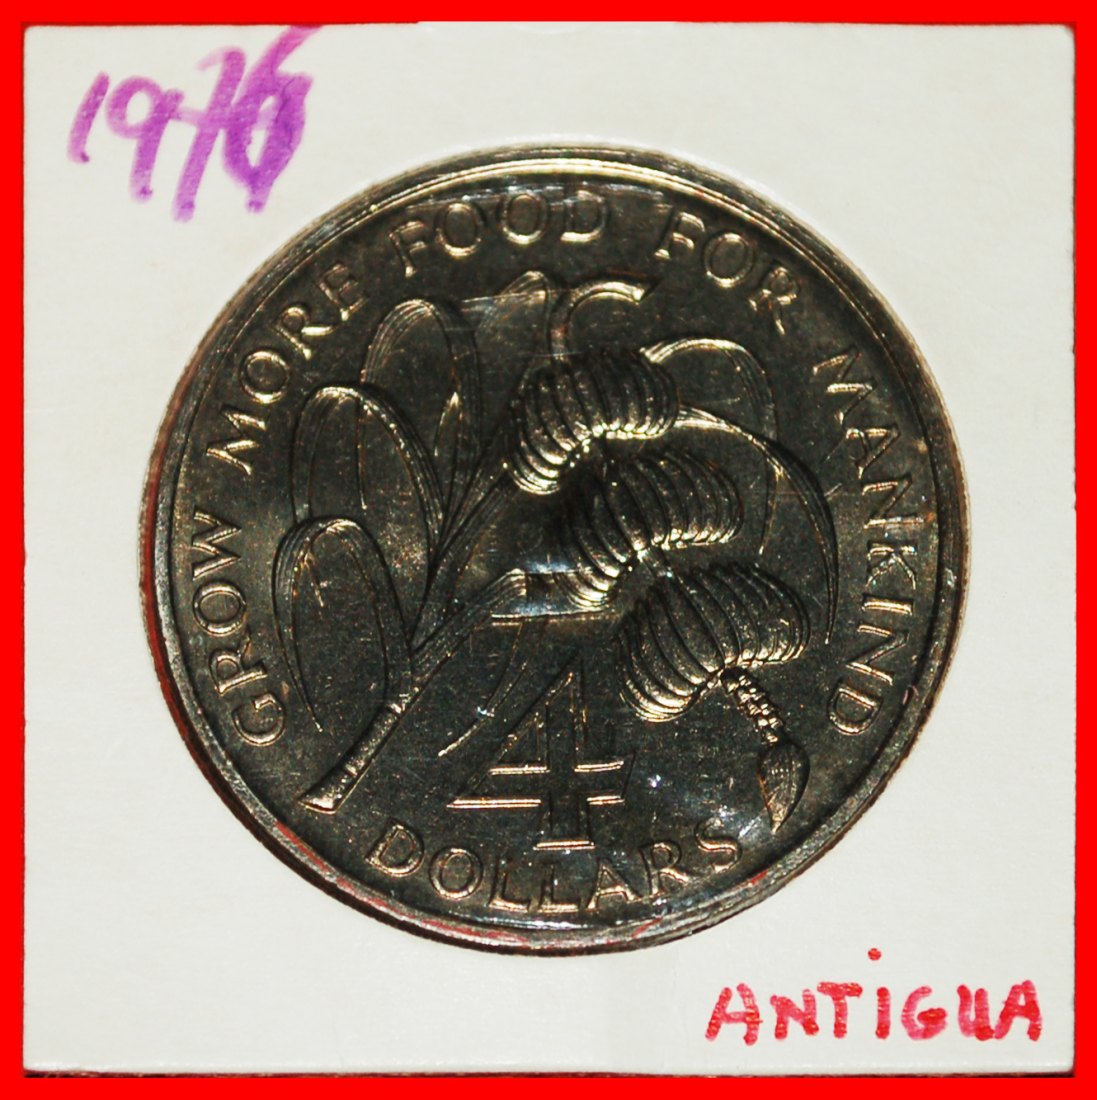  * GREAT BRITAIN FAO: ANTIGUA AND BARBUDA ★ 4 DOLLARS 1970 PROOF! RARE! LOW START ★ NO RESERVE!   